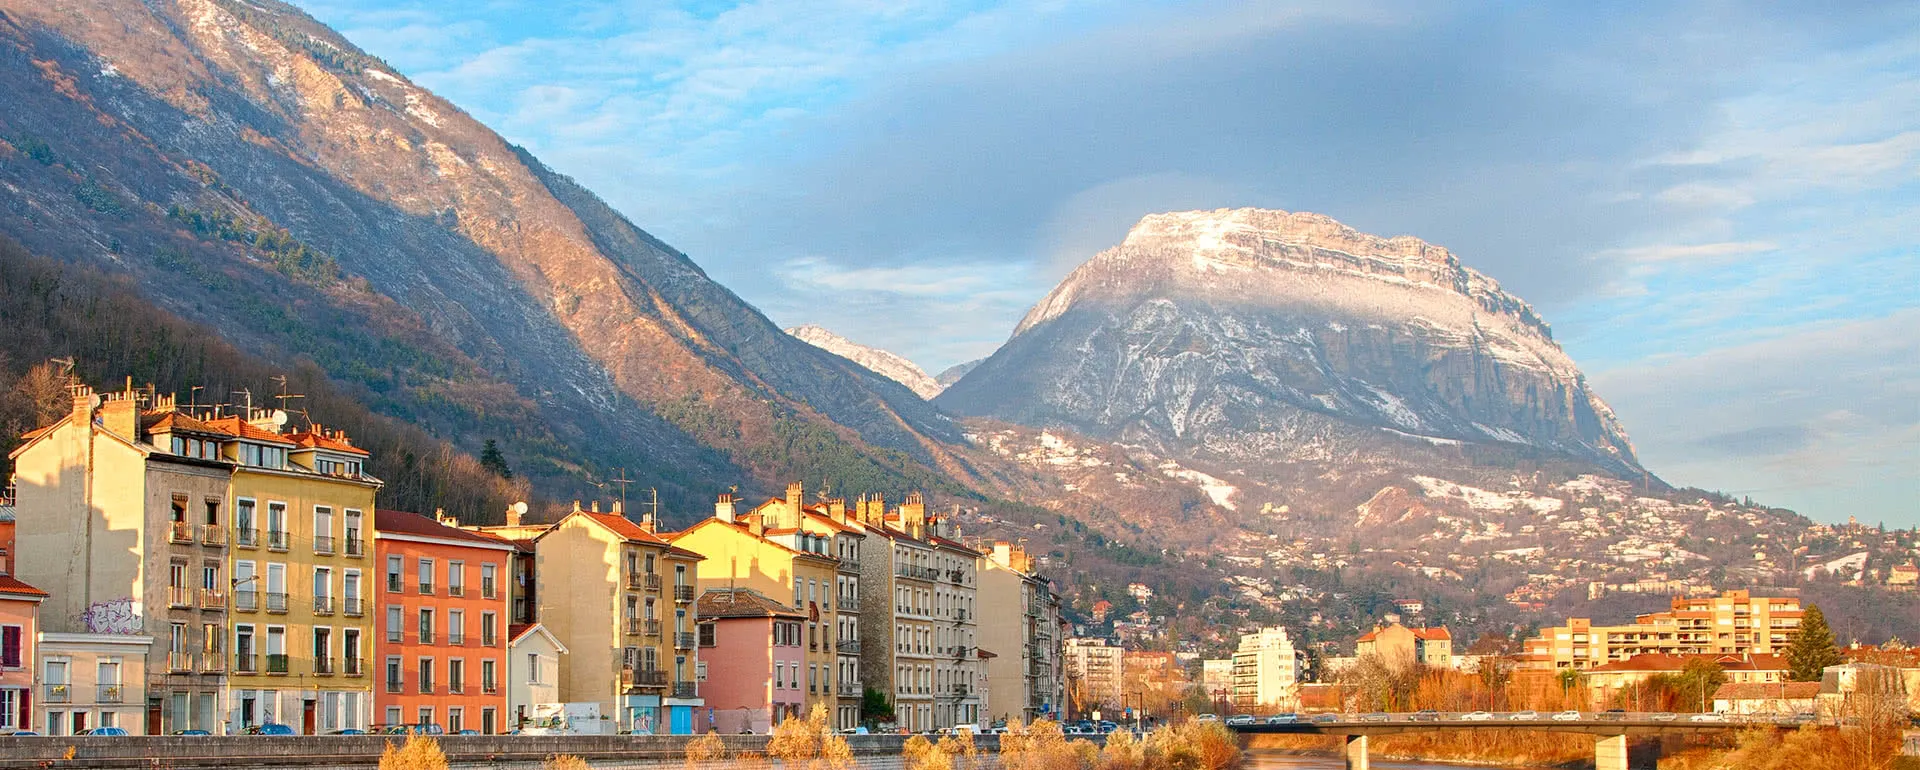 Grenoble - the destination for workers